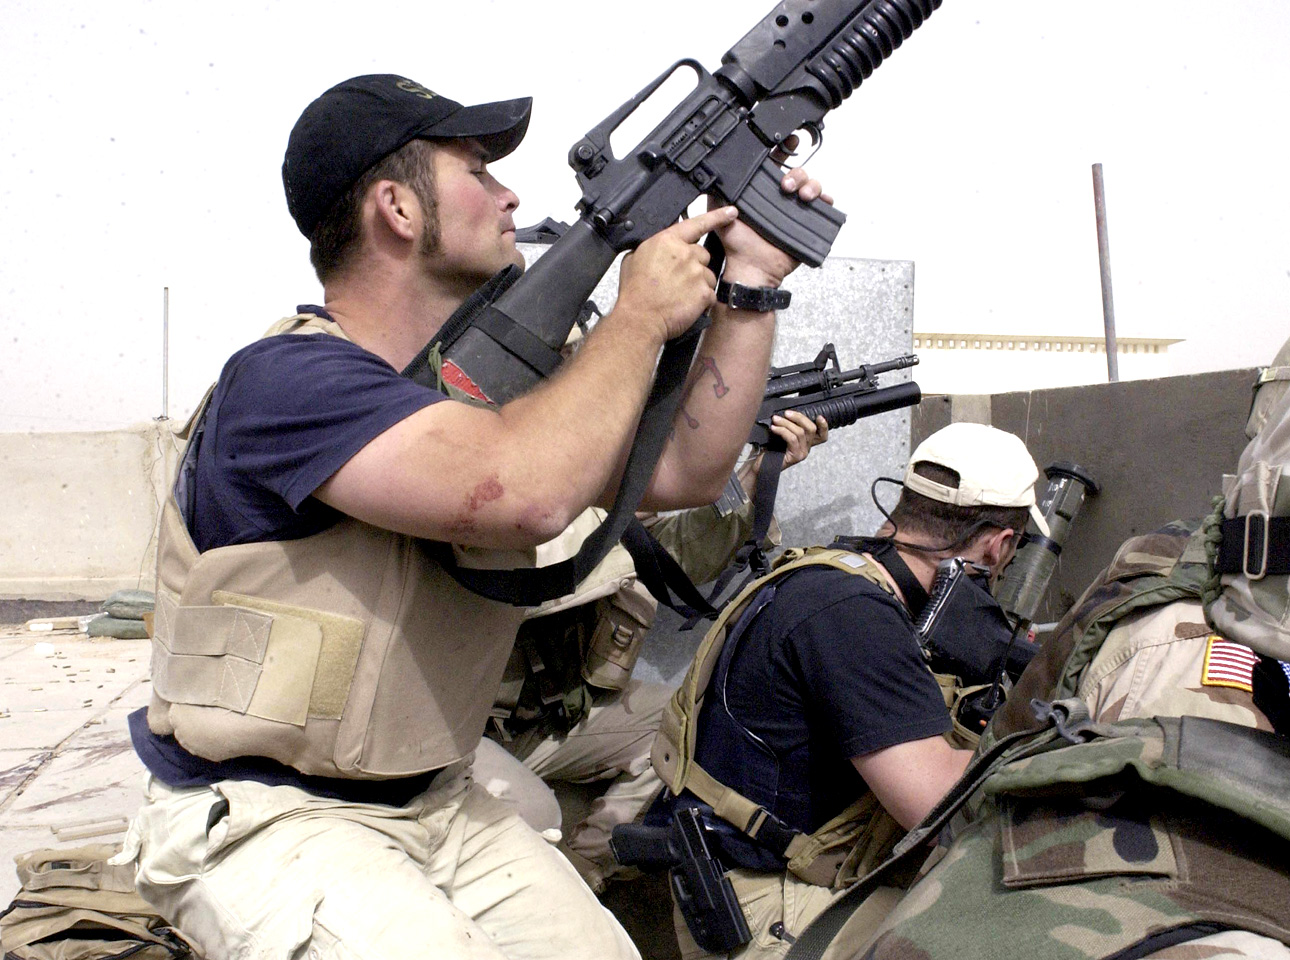 Firm formerly known as Blackwater fined $7.5 million - CBS News